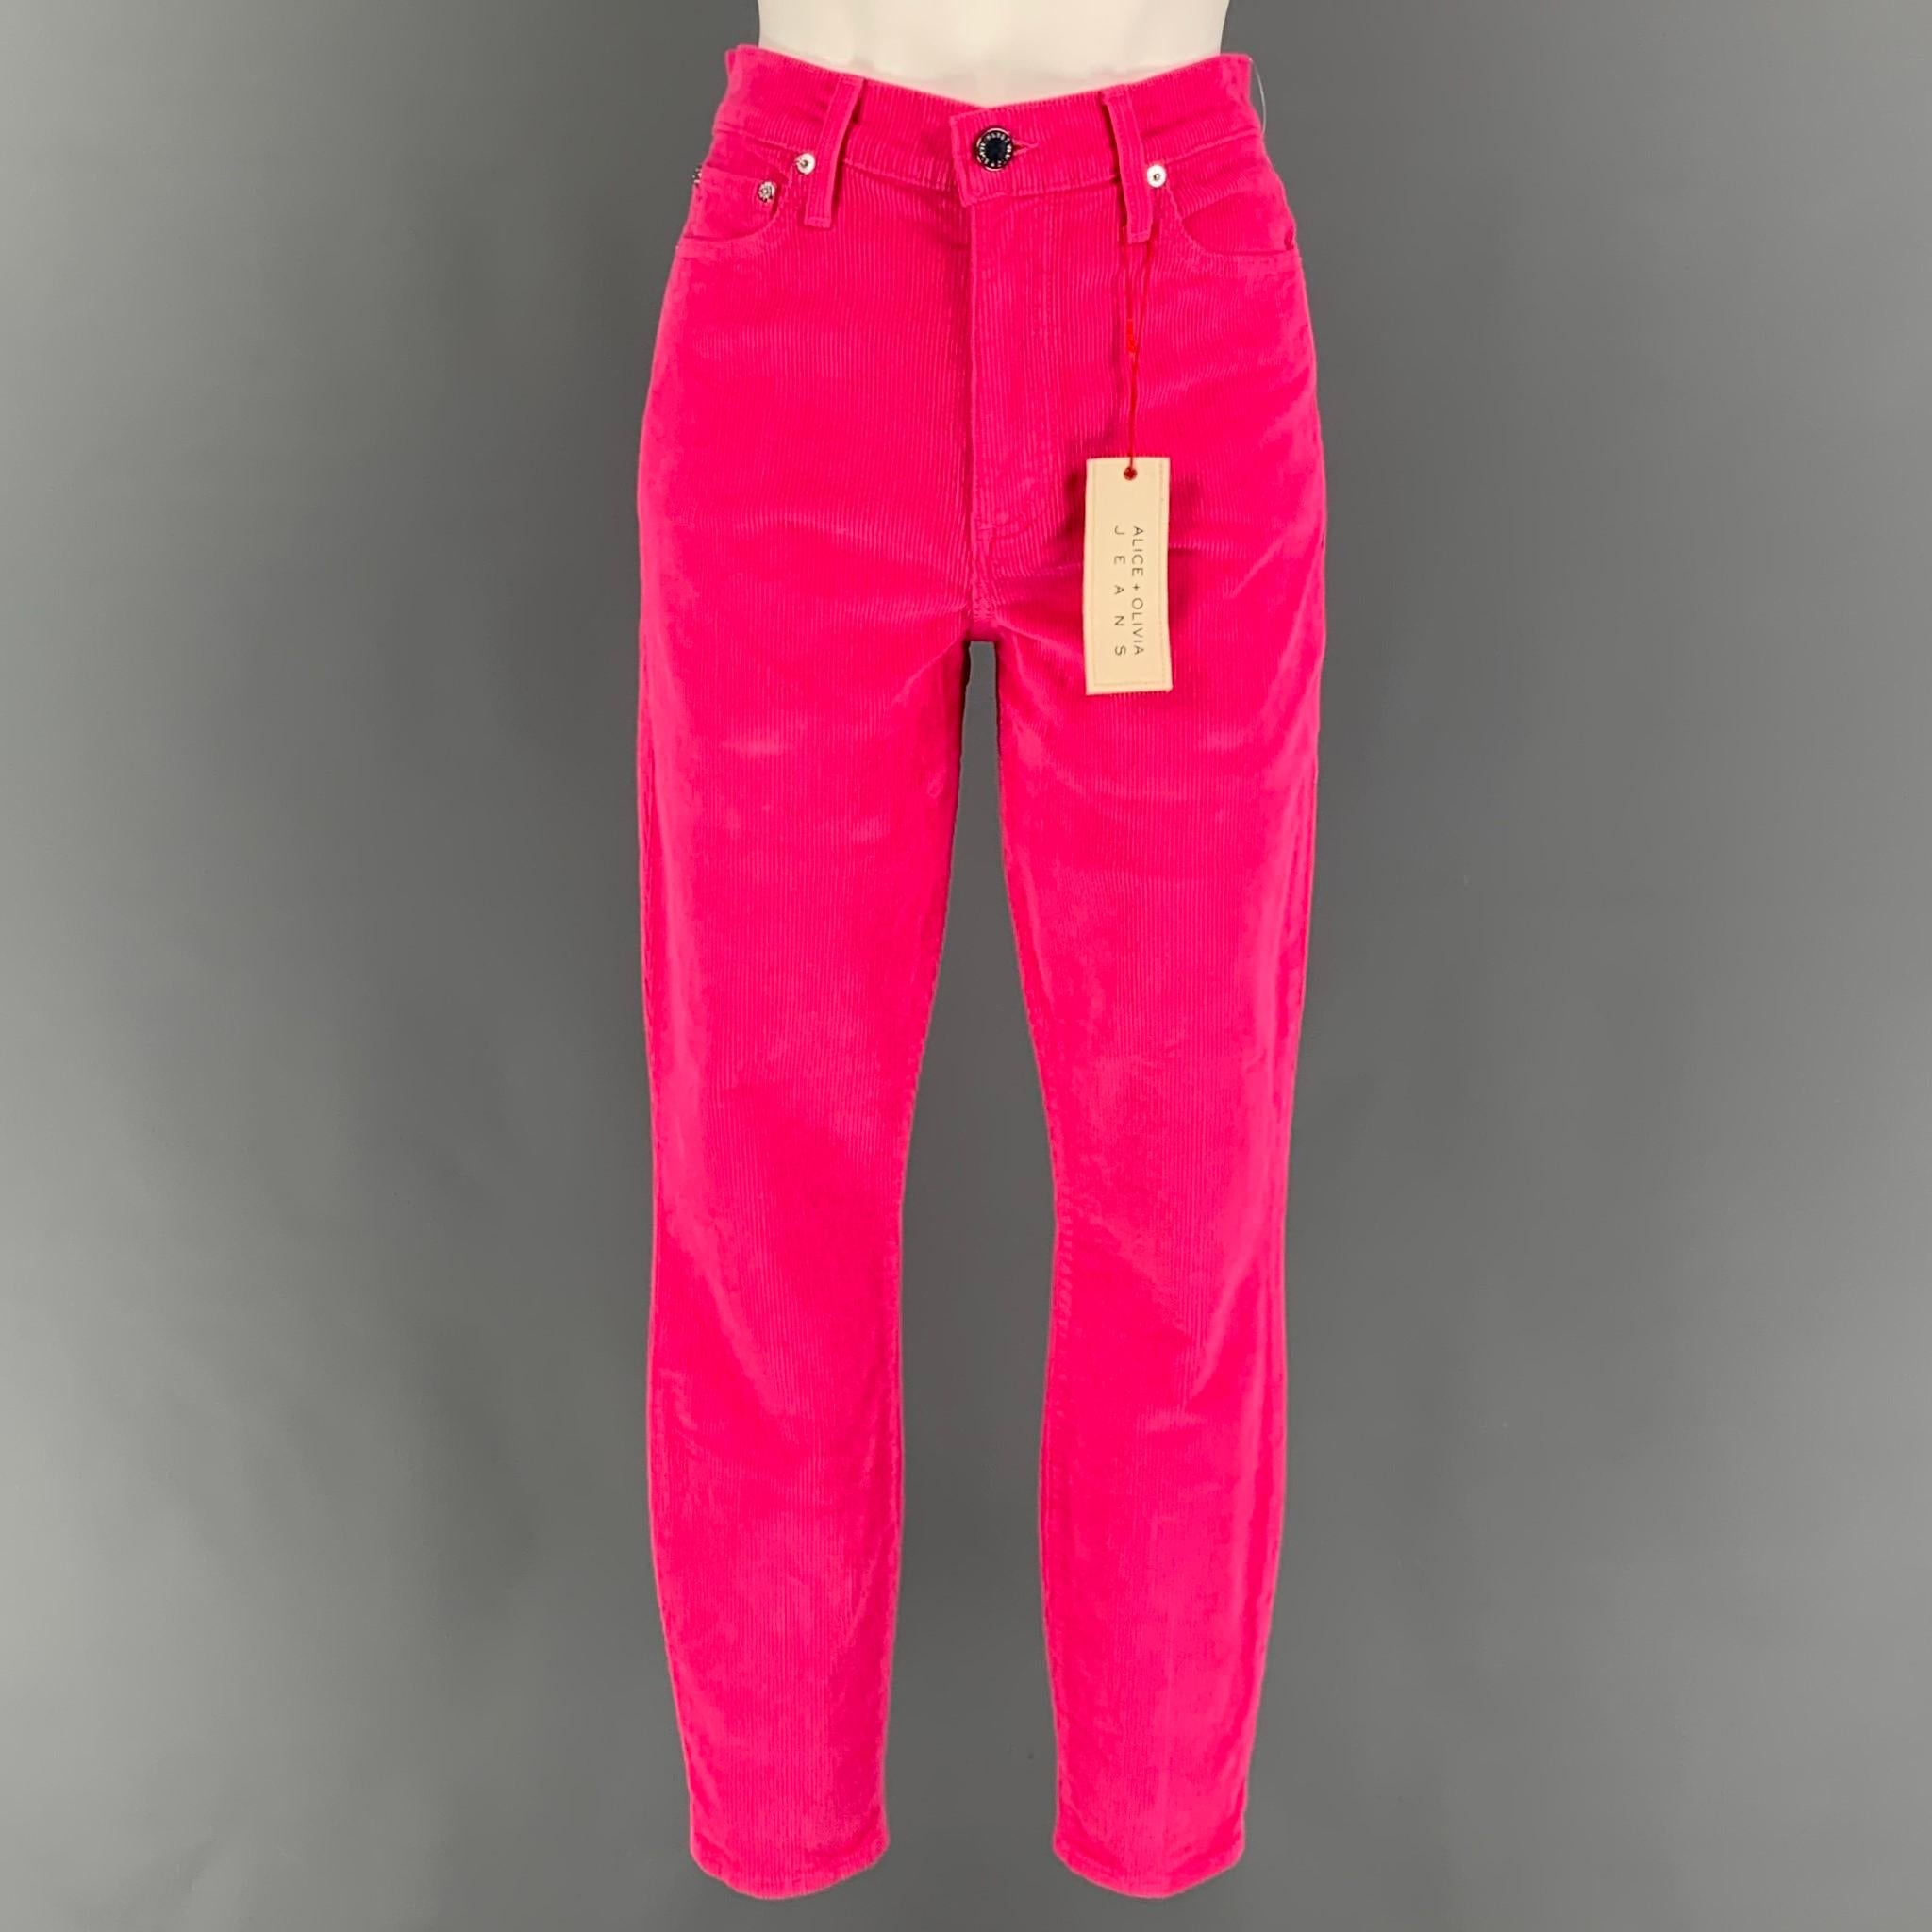 ALICE + OLIVIA Size 28 Pink Cotton Corduroy Jean Cut Casual Pants For ...